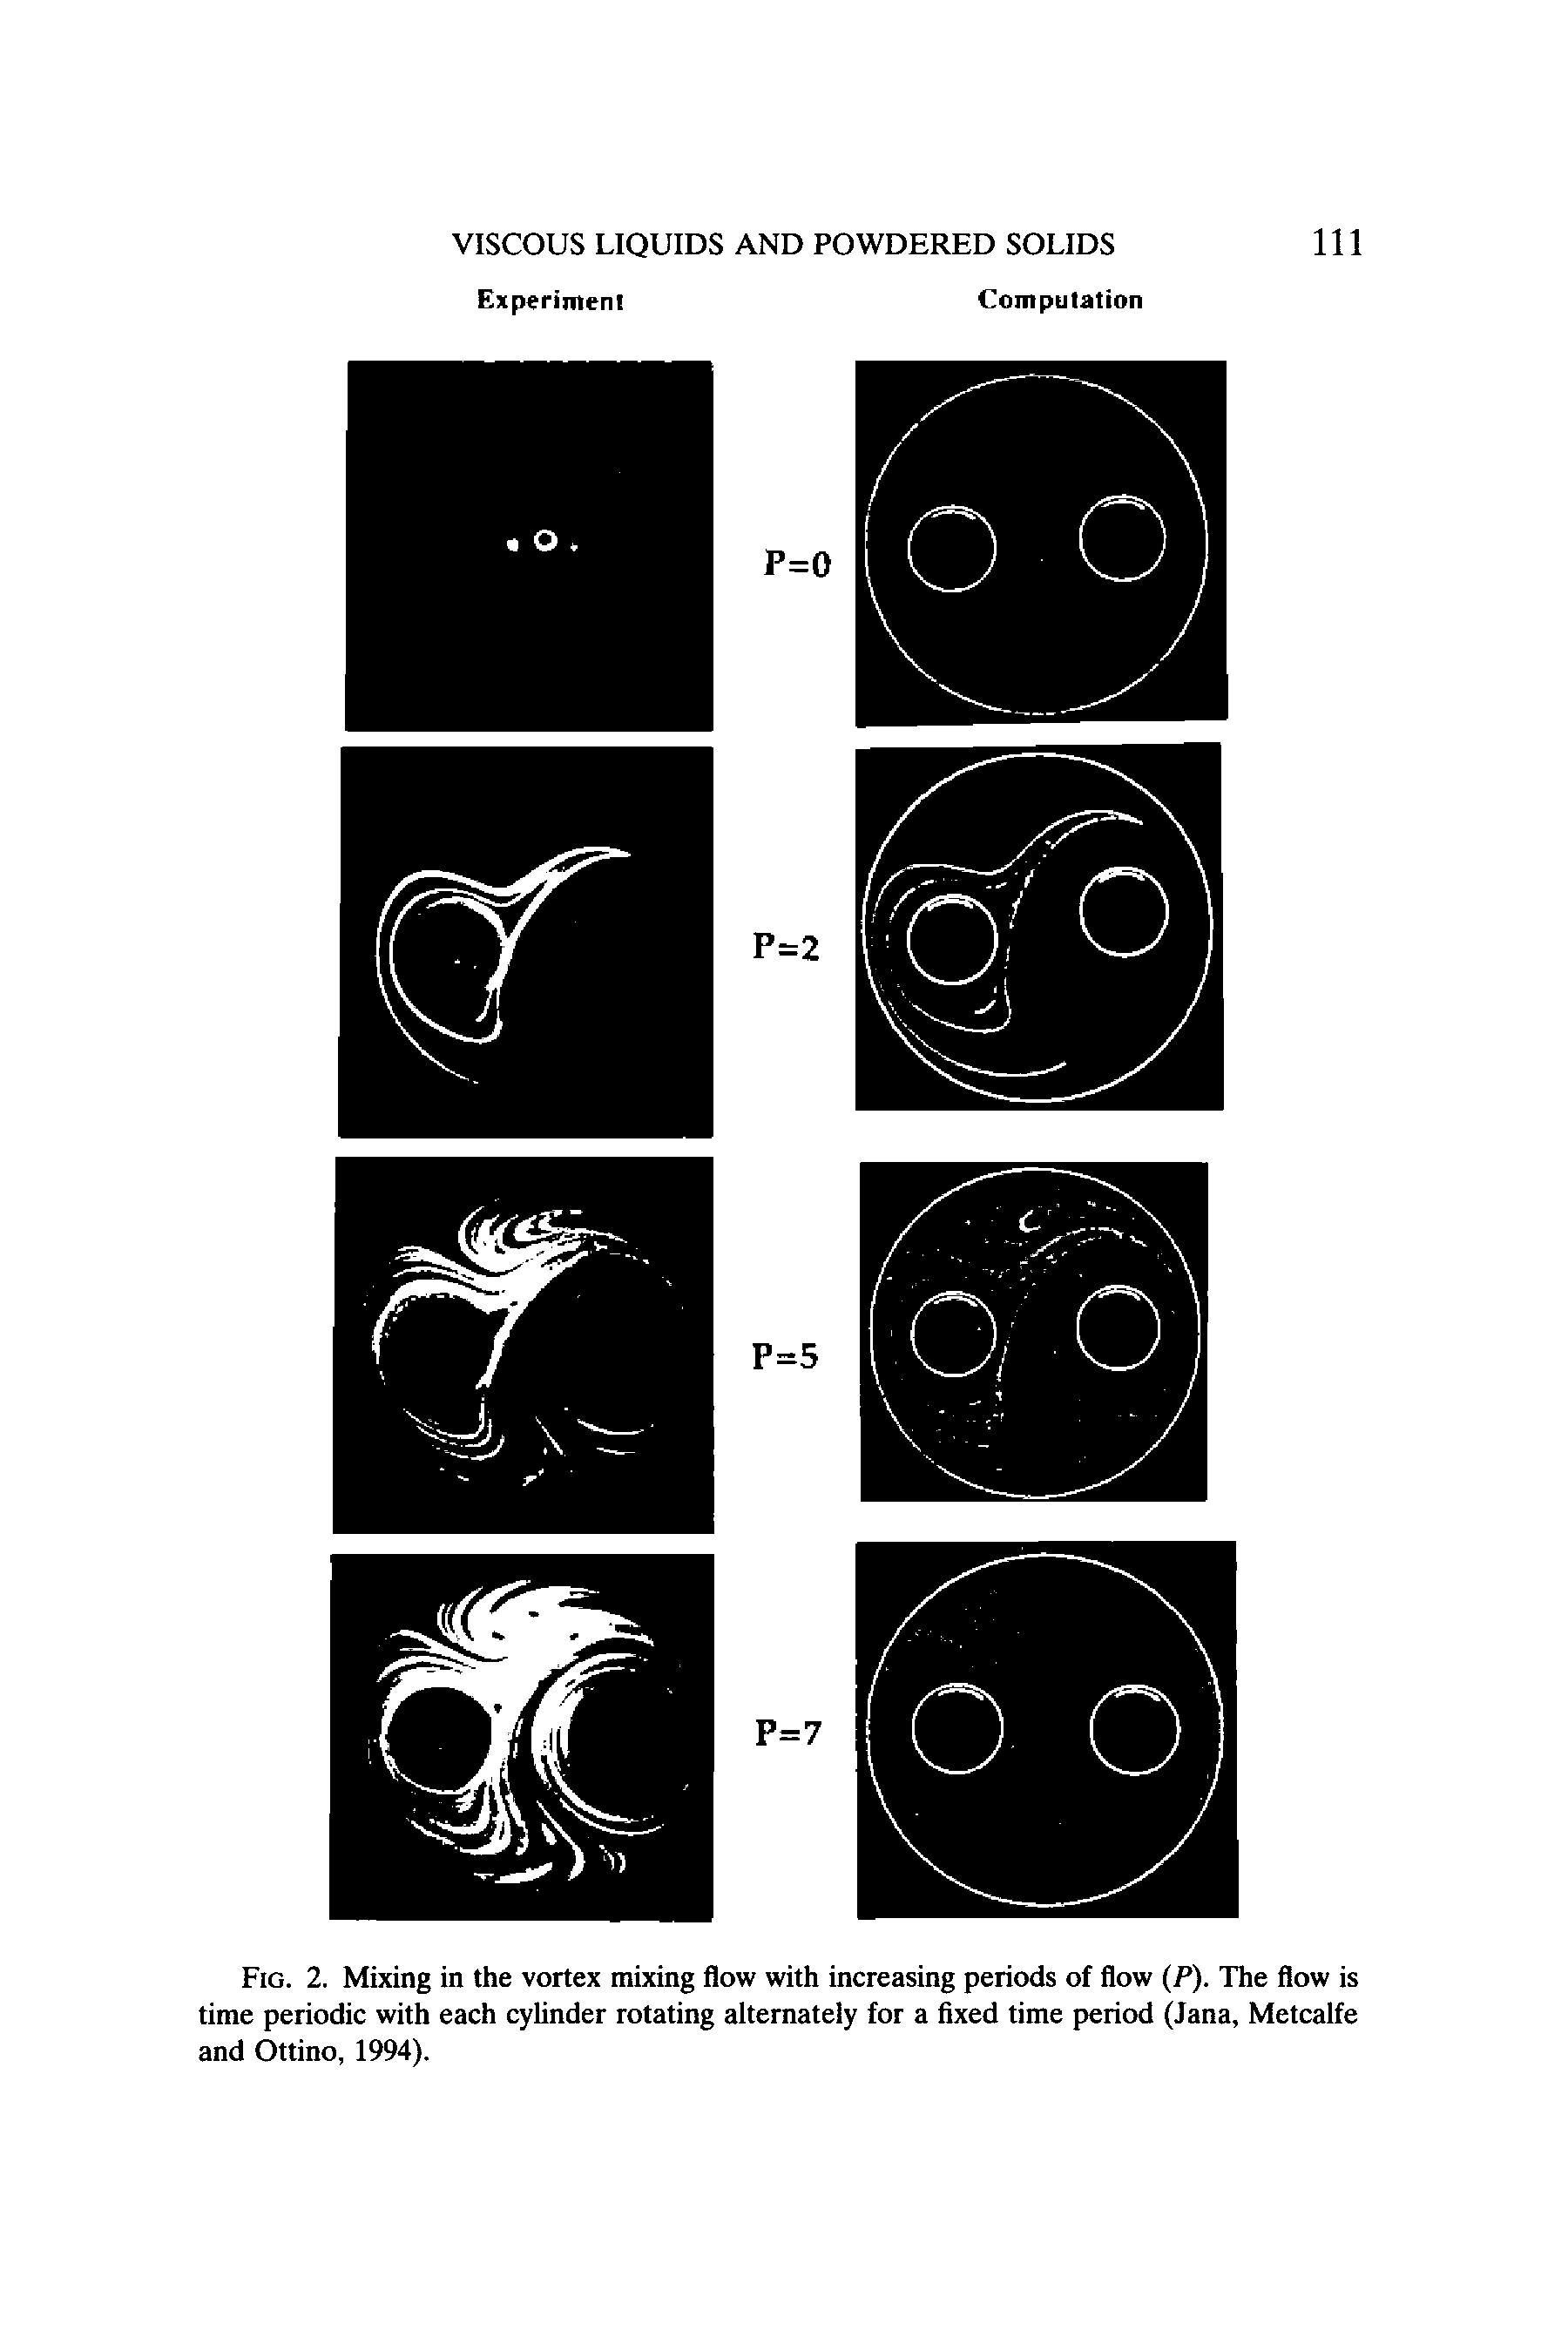 Fig. 2. Mixing in the vortex mixing flow with increasing periods of flow (P). The flow is time periodic with each cylinder rotating alternately for a fixed time period (Jana, Metcalfe and Ottino, 1994).